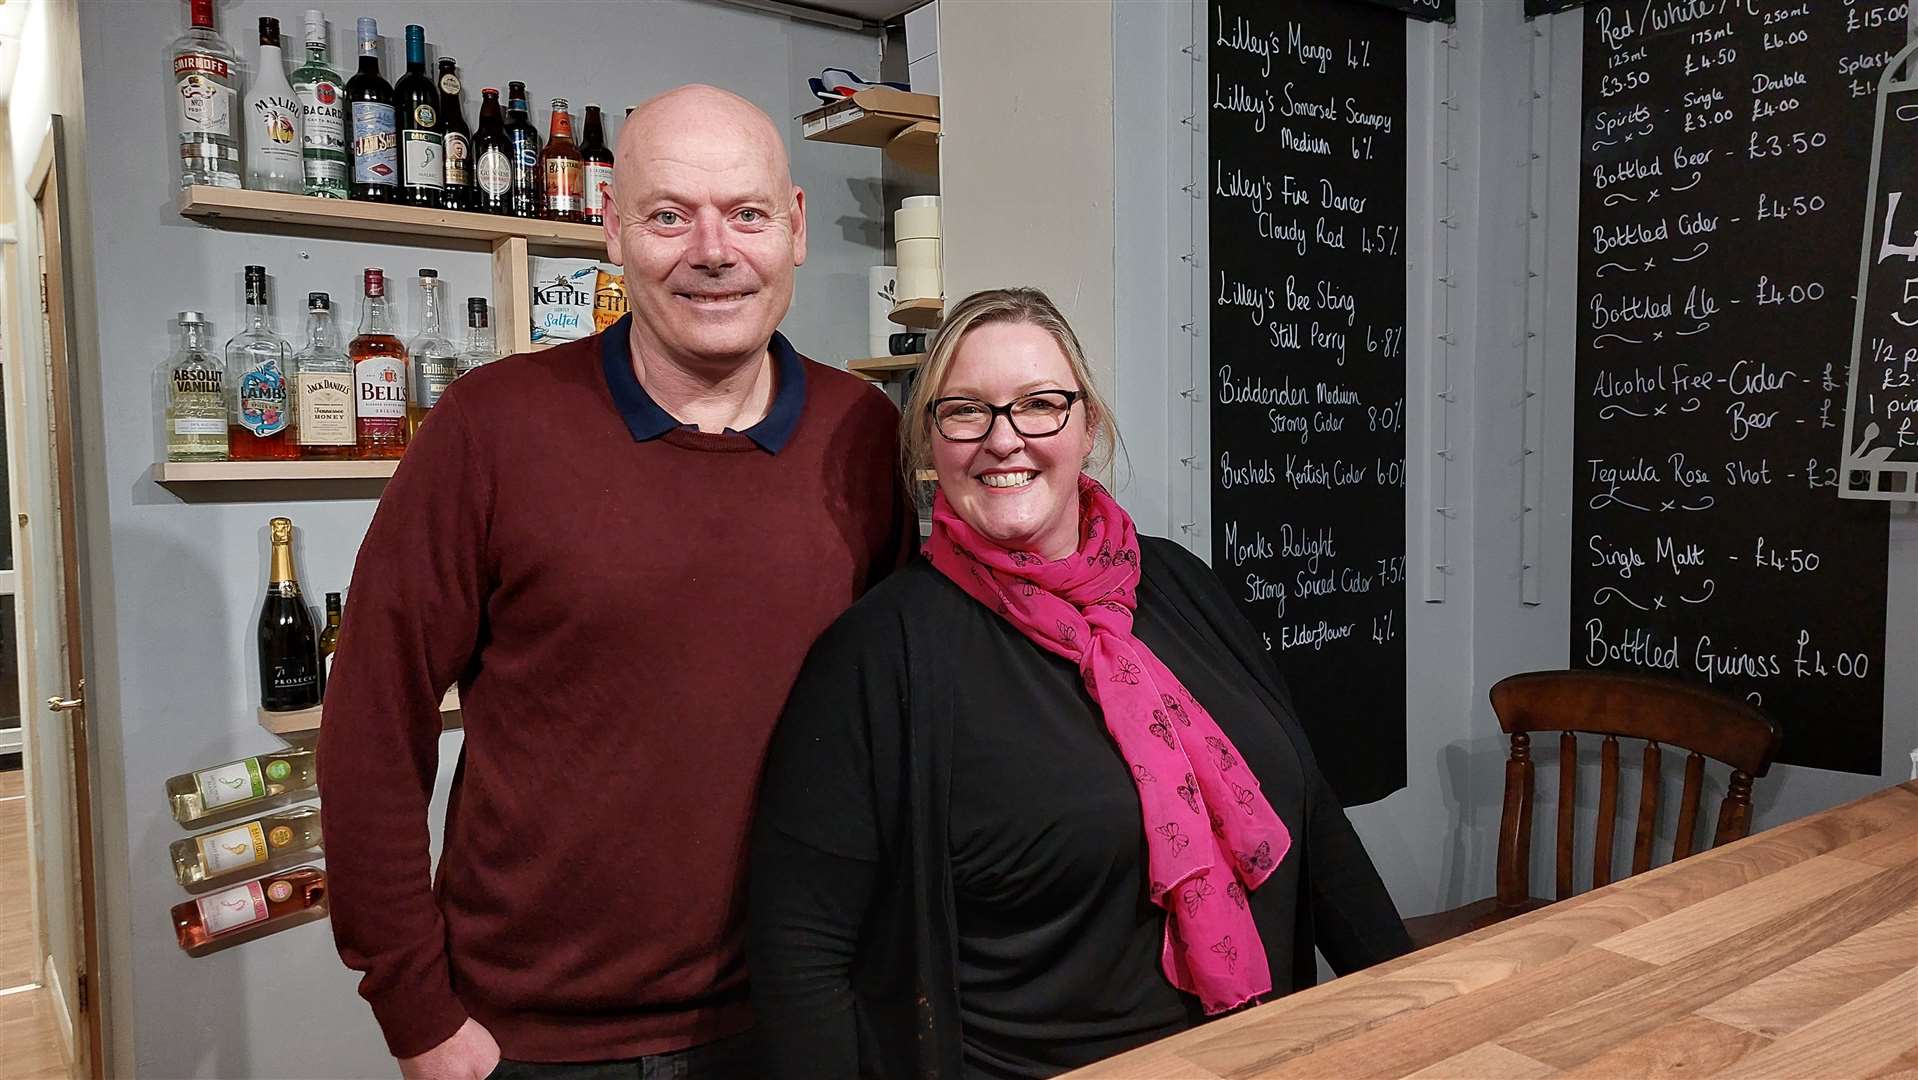 Husband and wife team Jason and Serena Scoble are behind the micropub